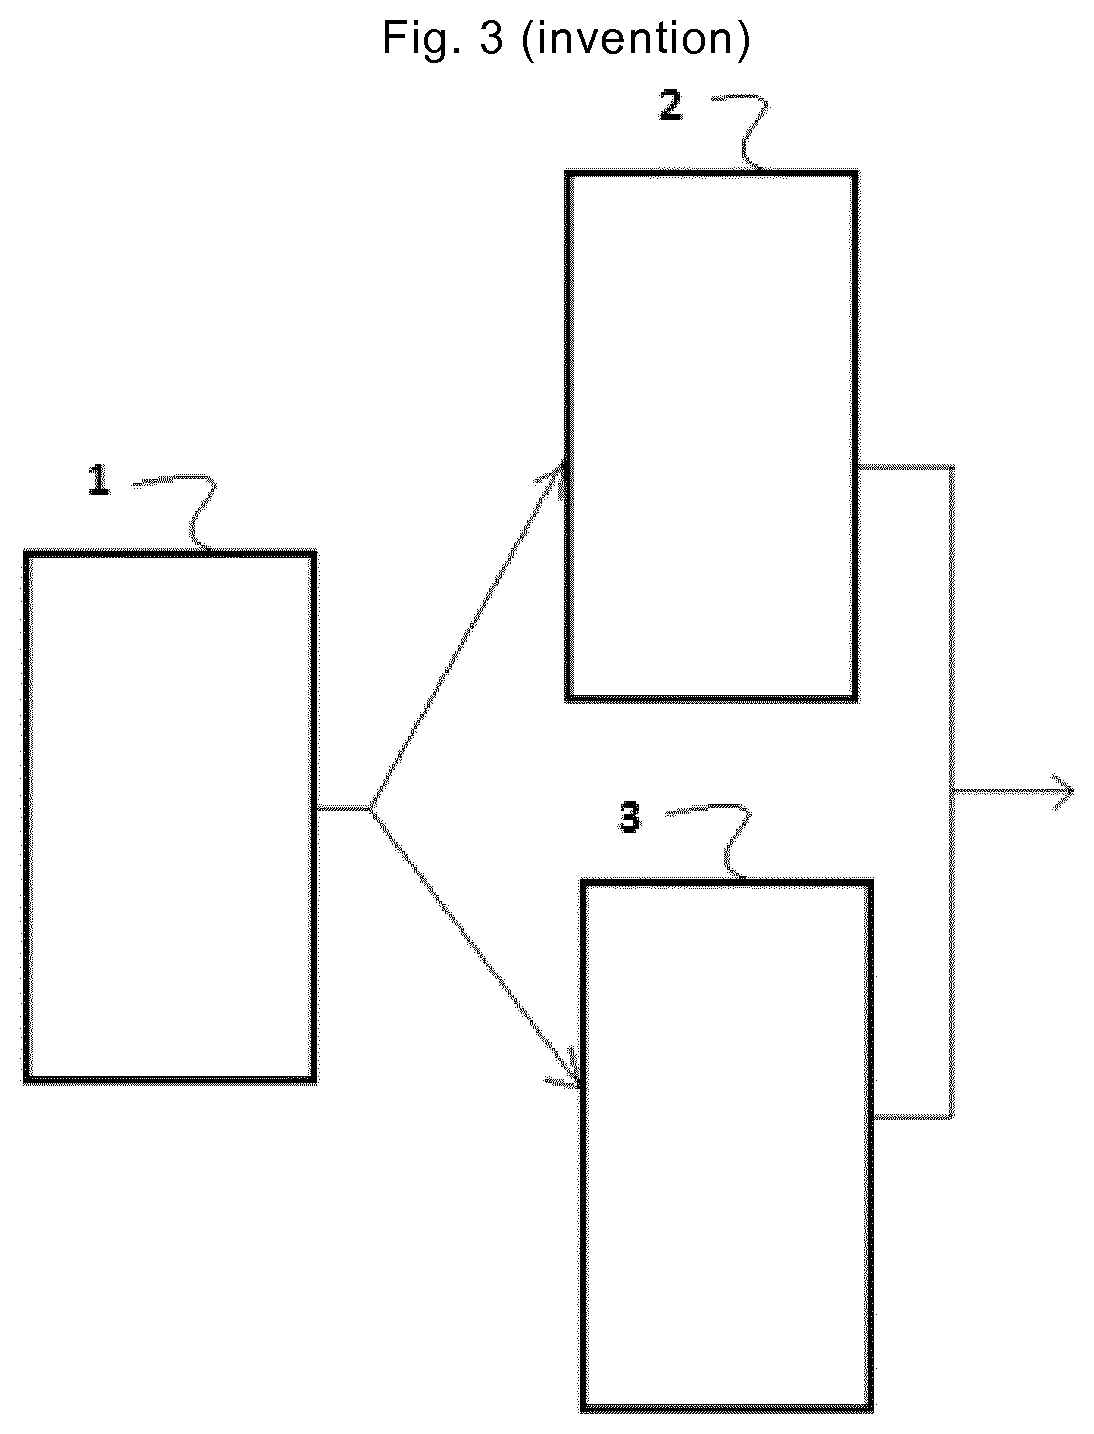 Combined sequential parallel reactor configuration